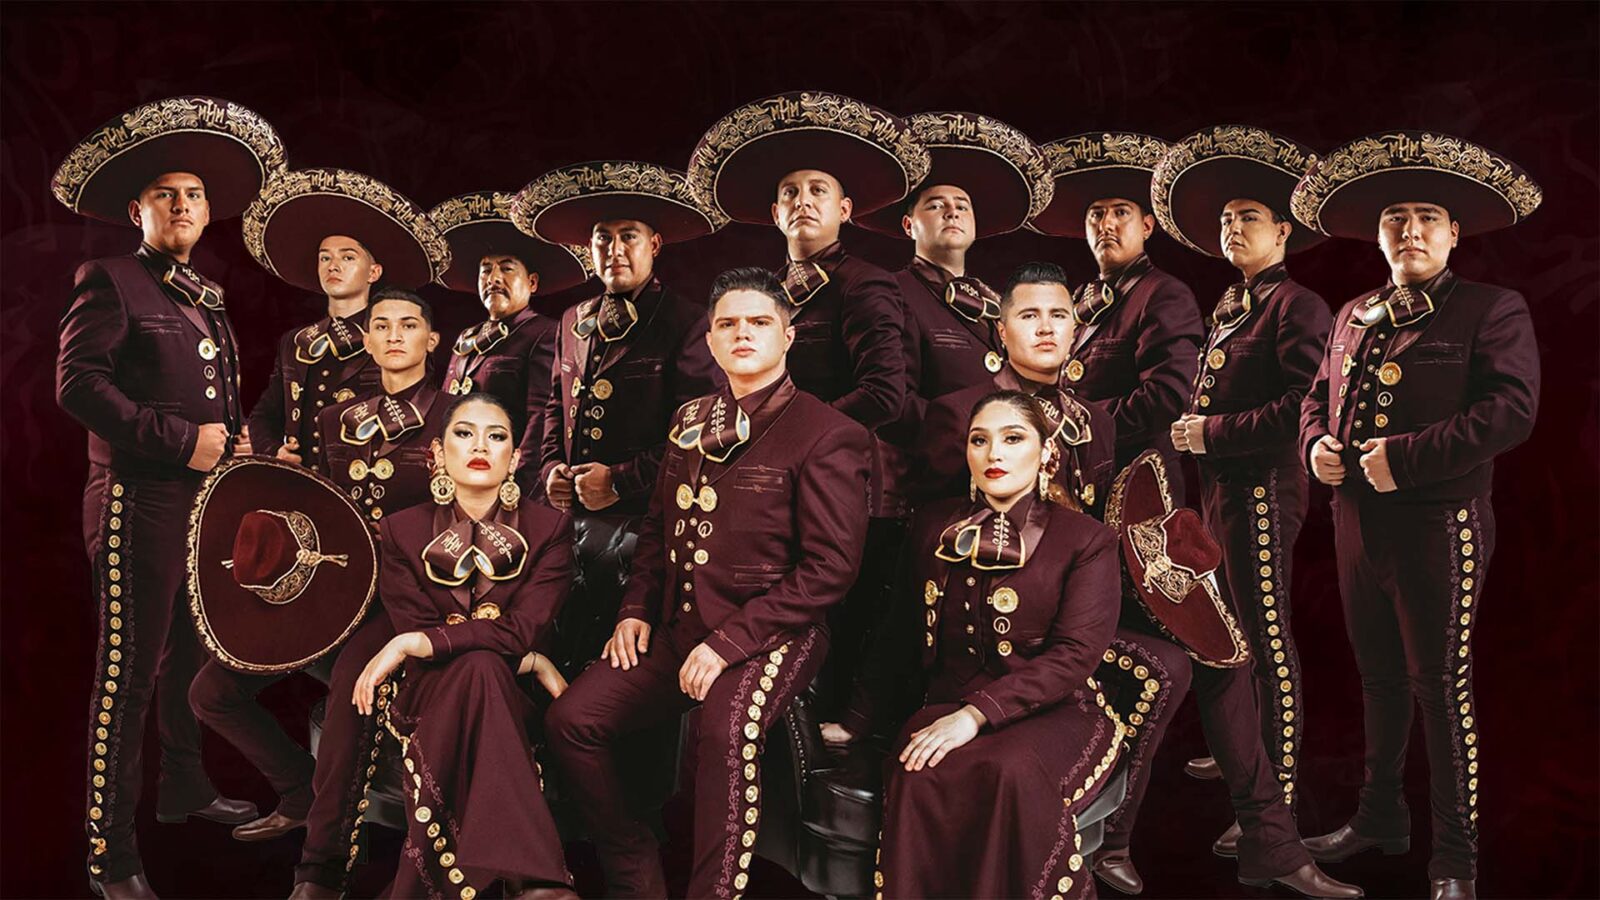 A group of mariachi artists wearing intricate maroon uniforms with their stylized hats.